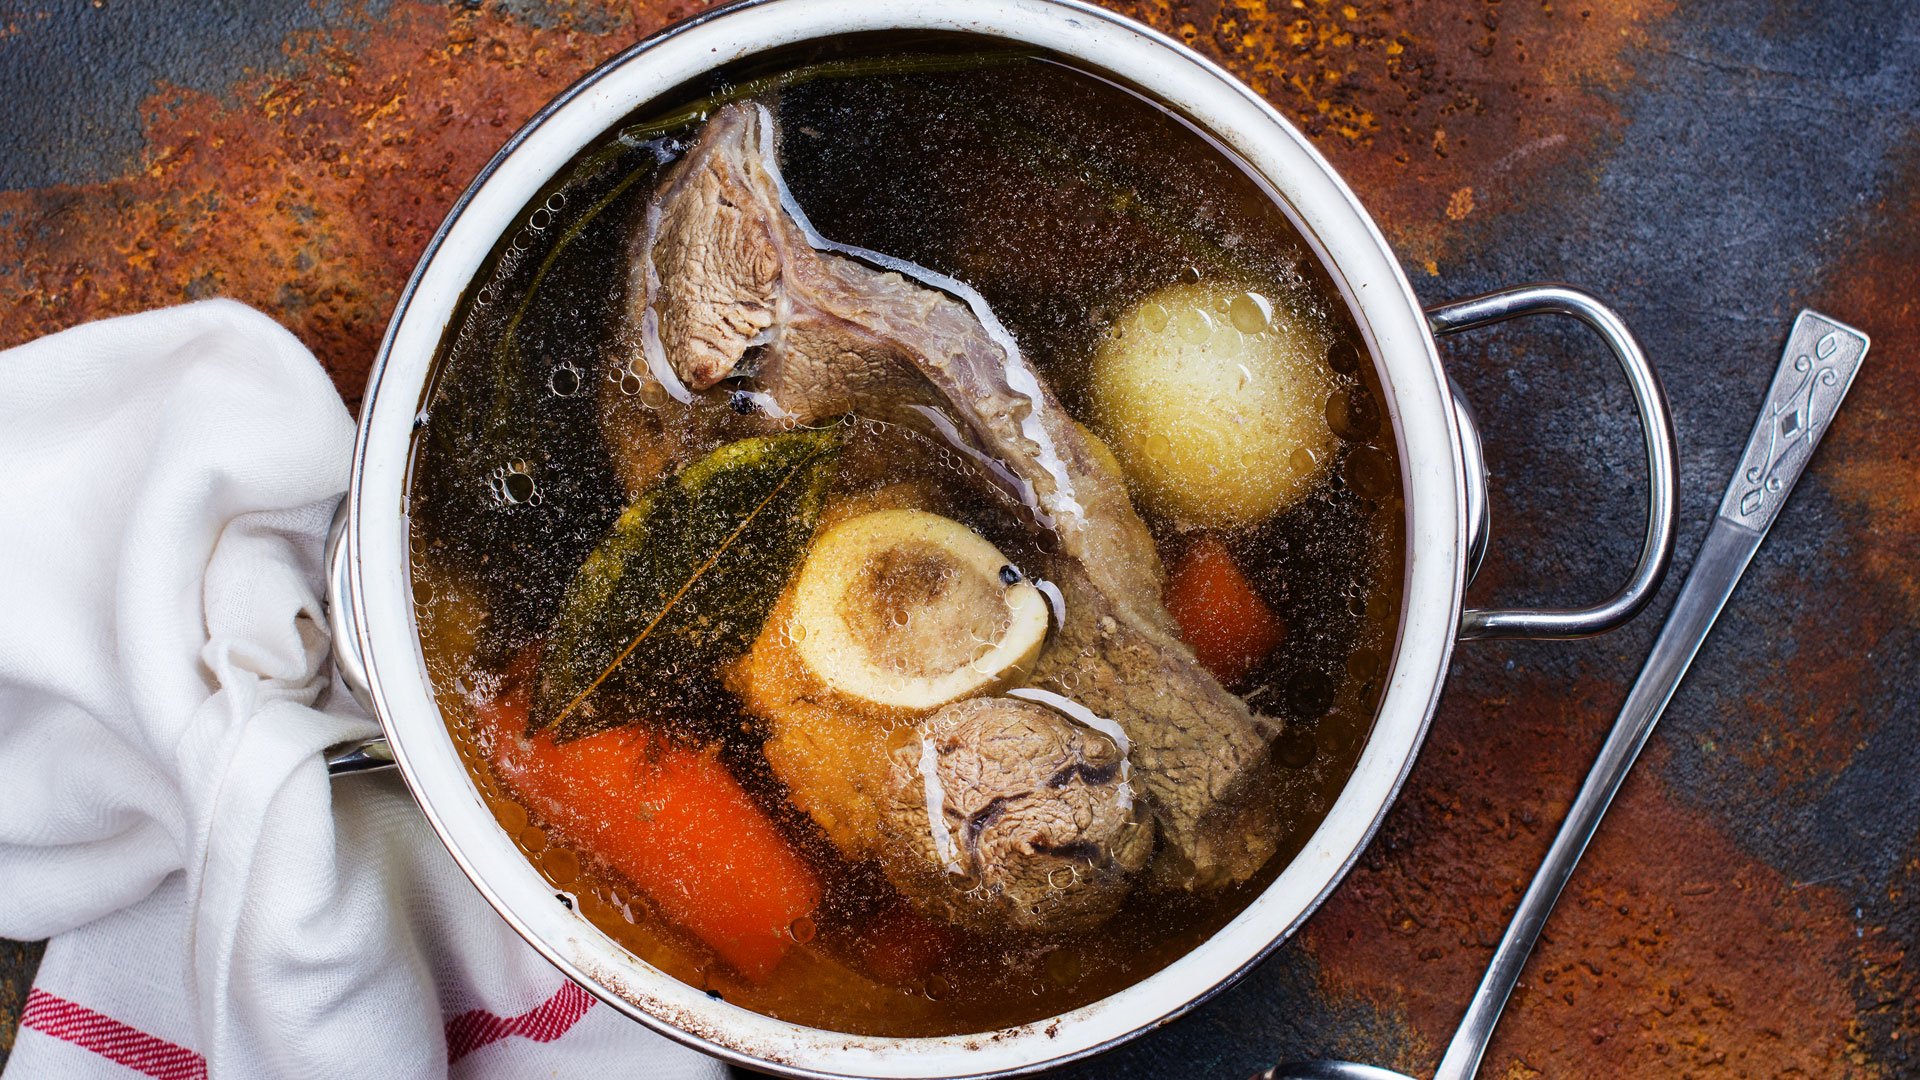 You'll find collagen in this stock pot filled with beef bones and aromatic vegetables. 